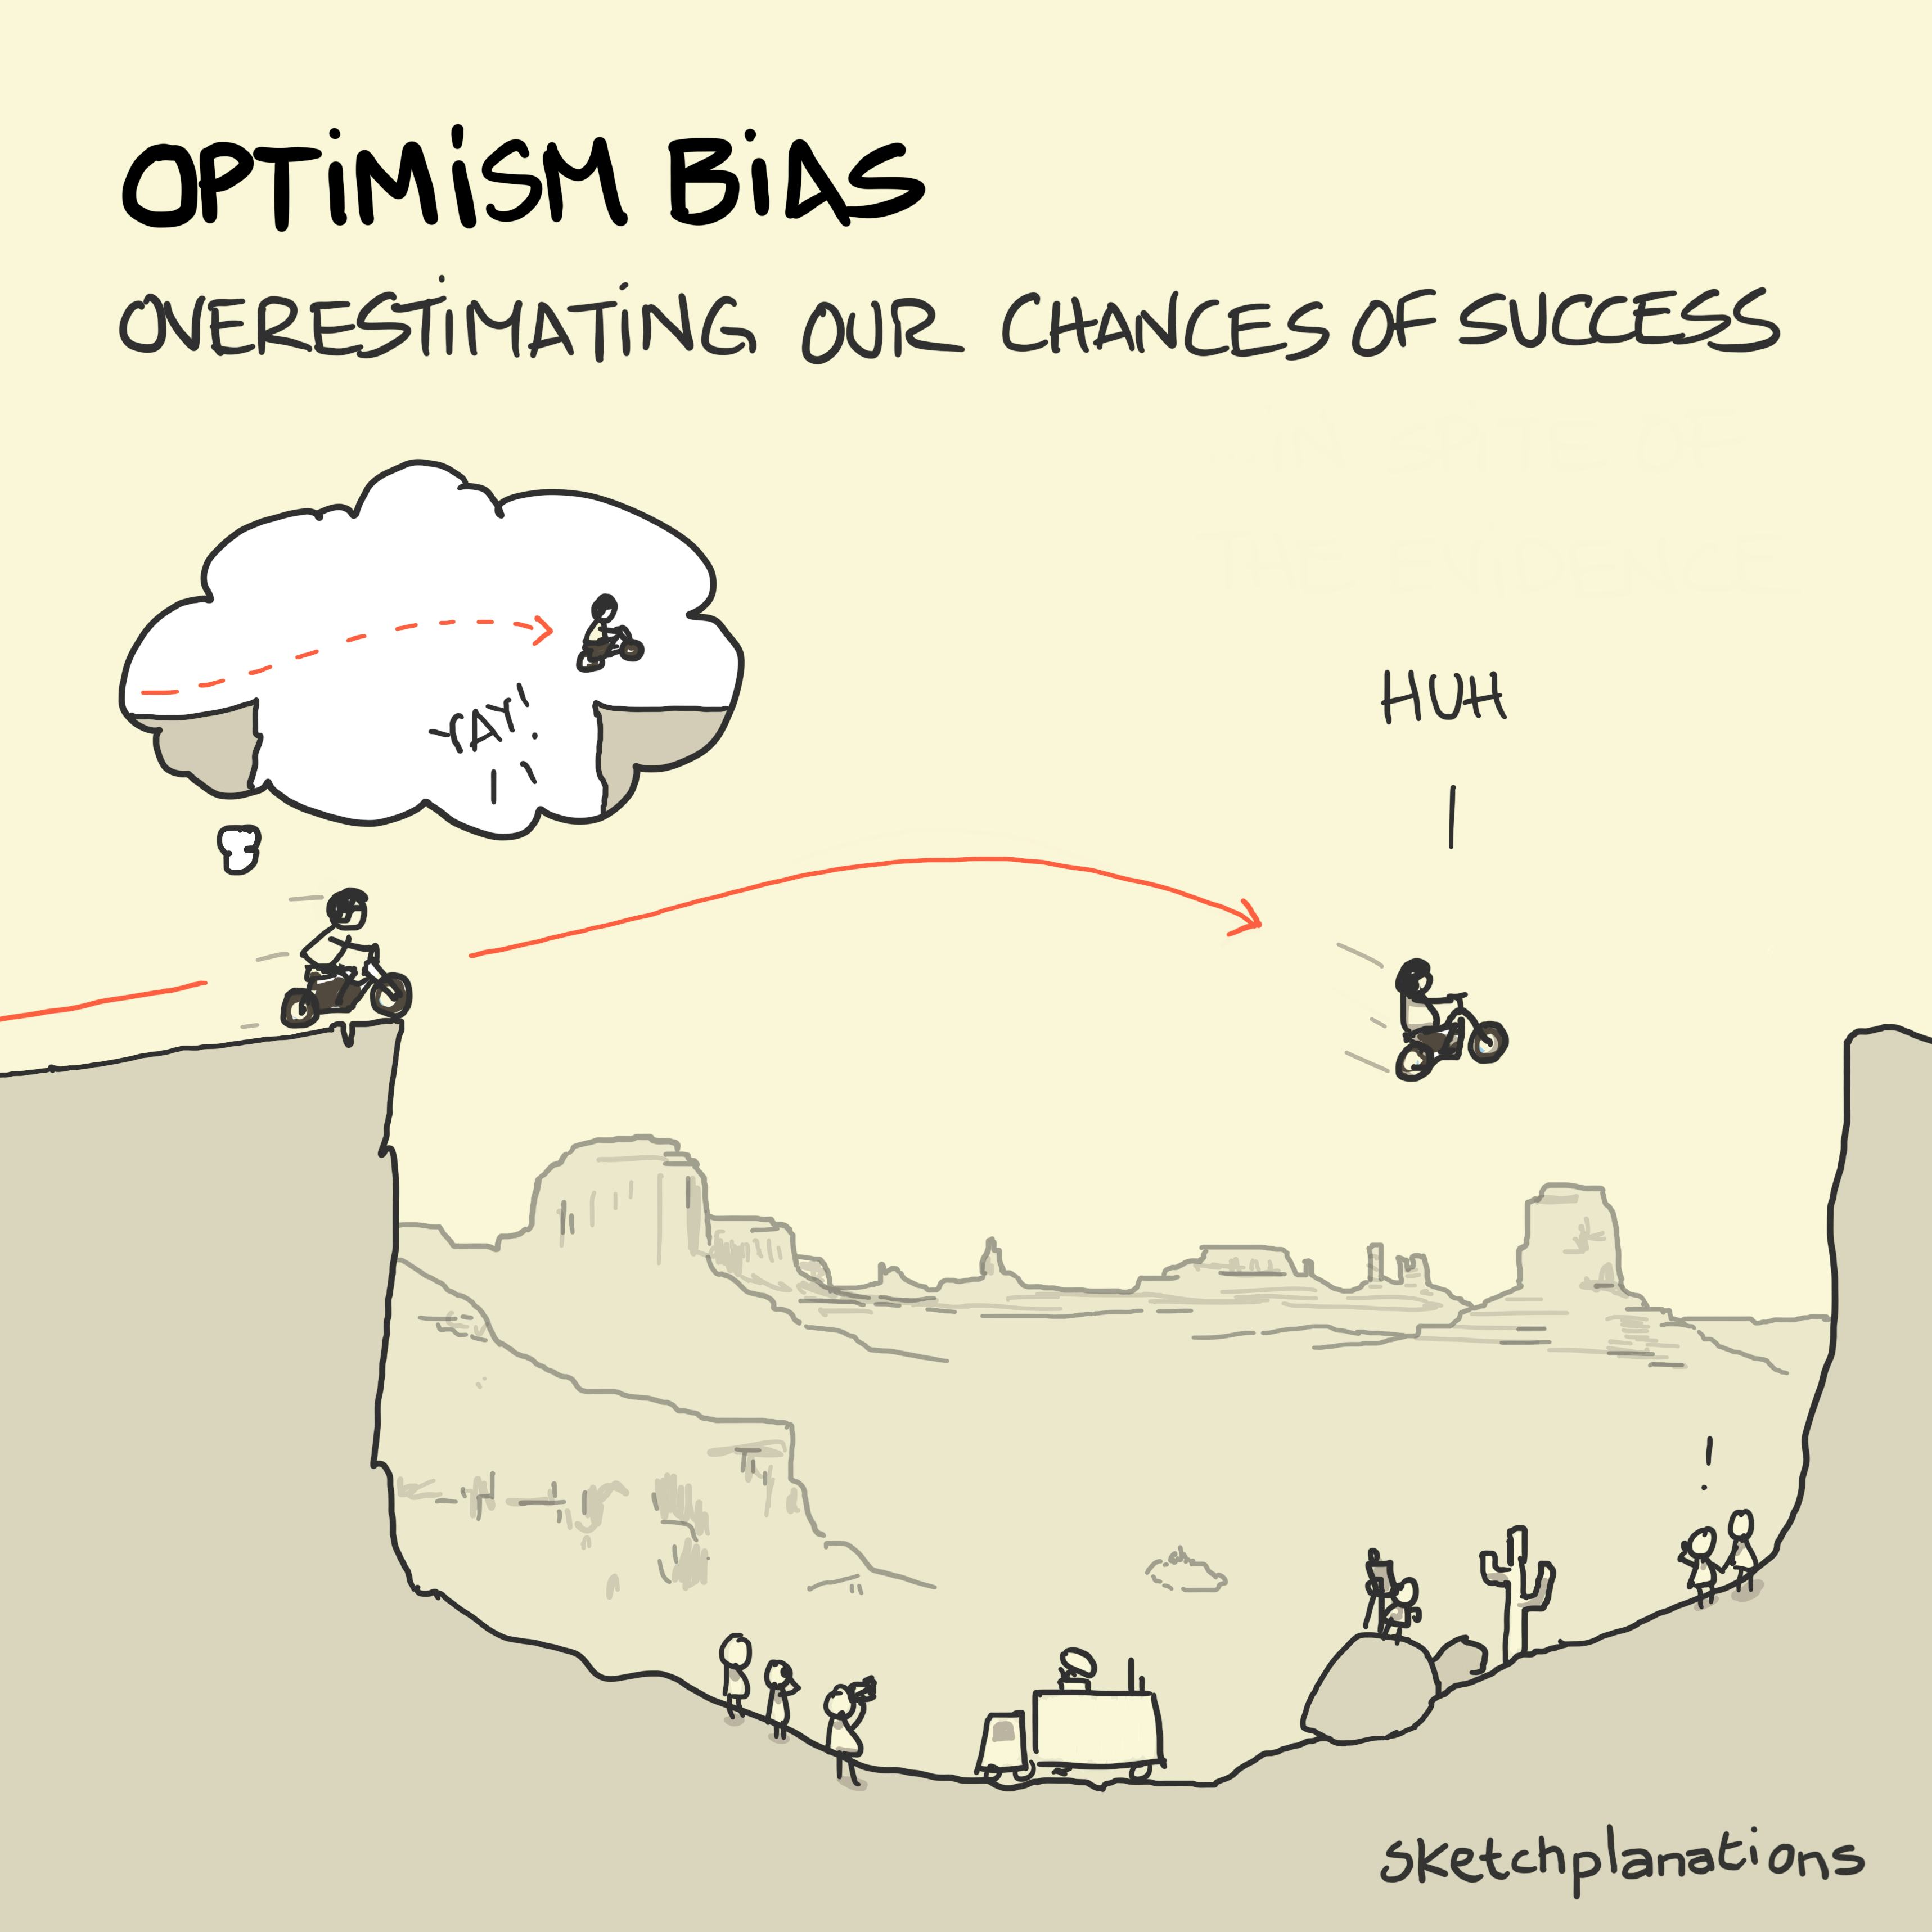 A stunt rider overestimates their chance of leaping a canyon thanks to optimism bias. Various onlookers gasp. "Huh" says the rider